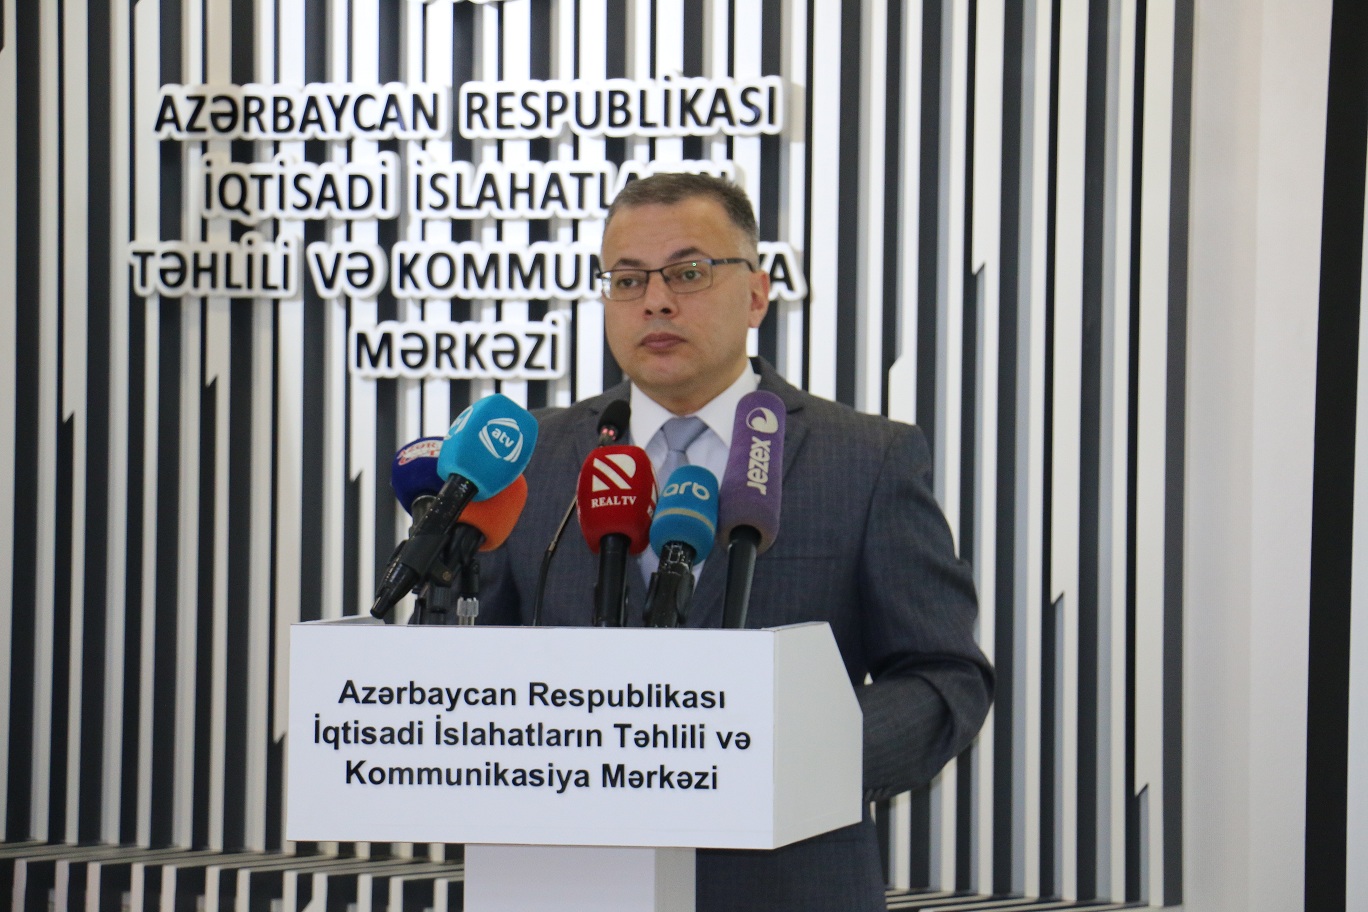 The Center for Analysis of Economic Reforms and Communication held a press conference on the monitoring and evaluation report of  "Strategic Road Maps on the national economy and key sectors of the economy in the Republic of Azerbaijan" for 2017-2020